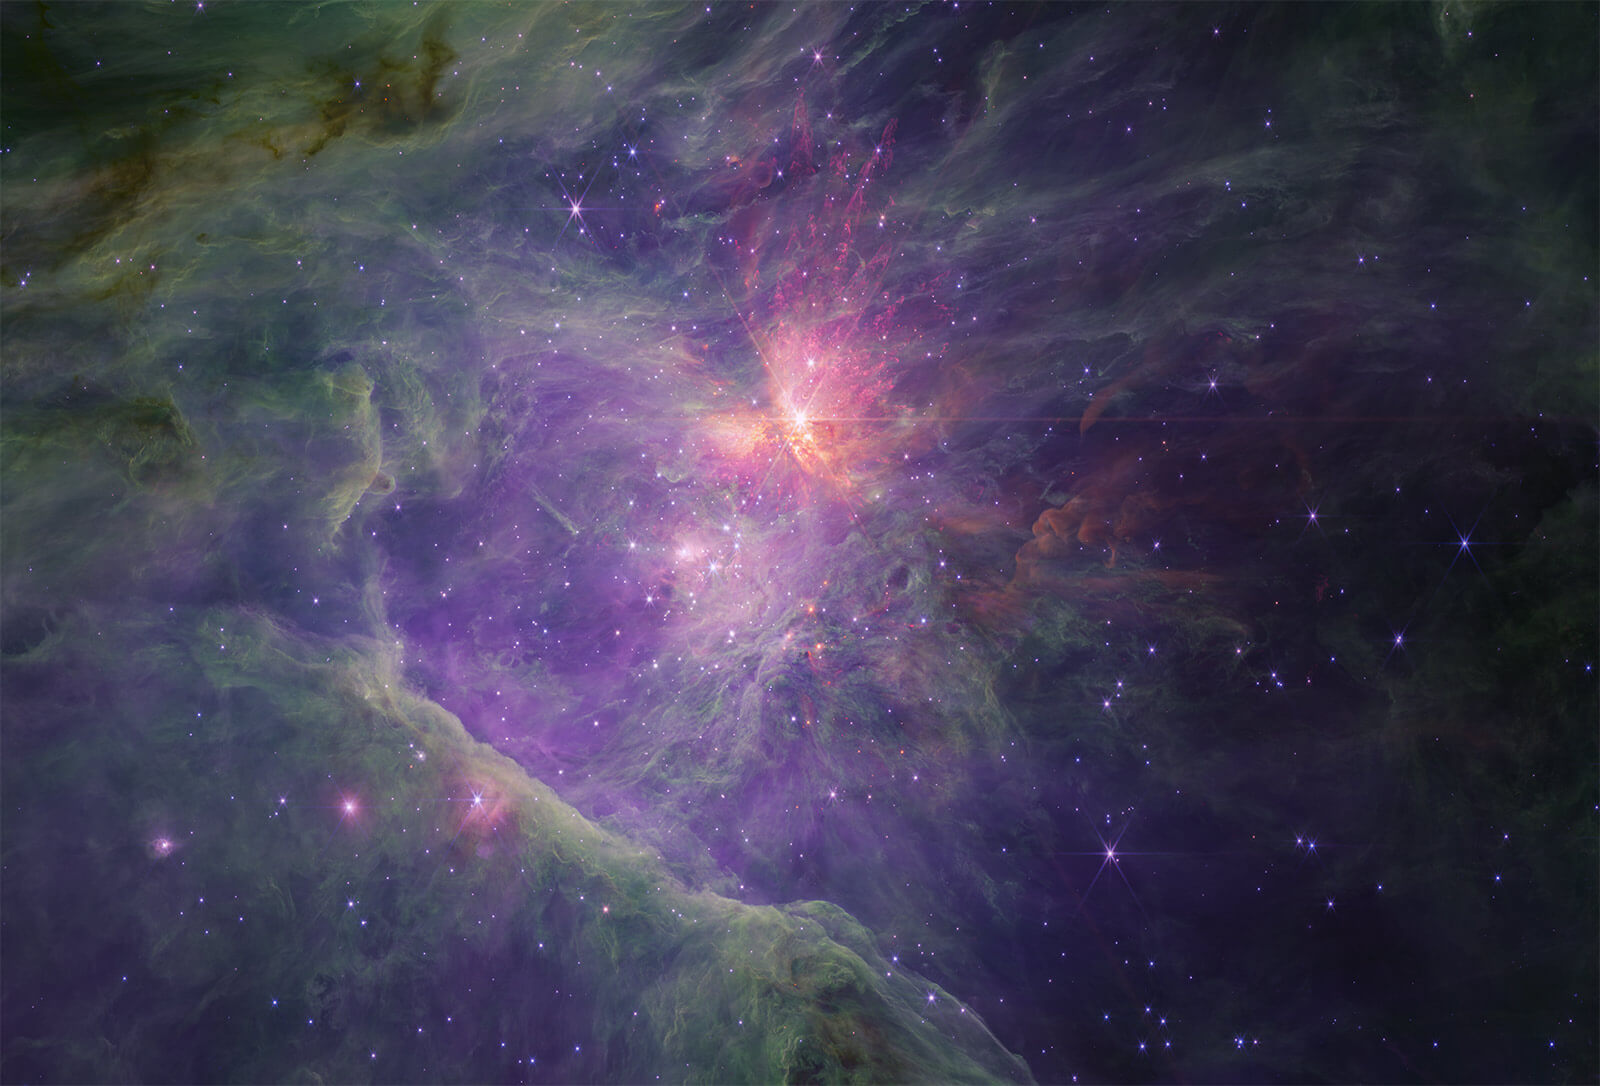 The famous Orion Nebula star forming region